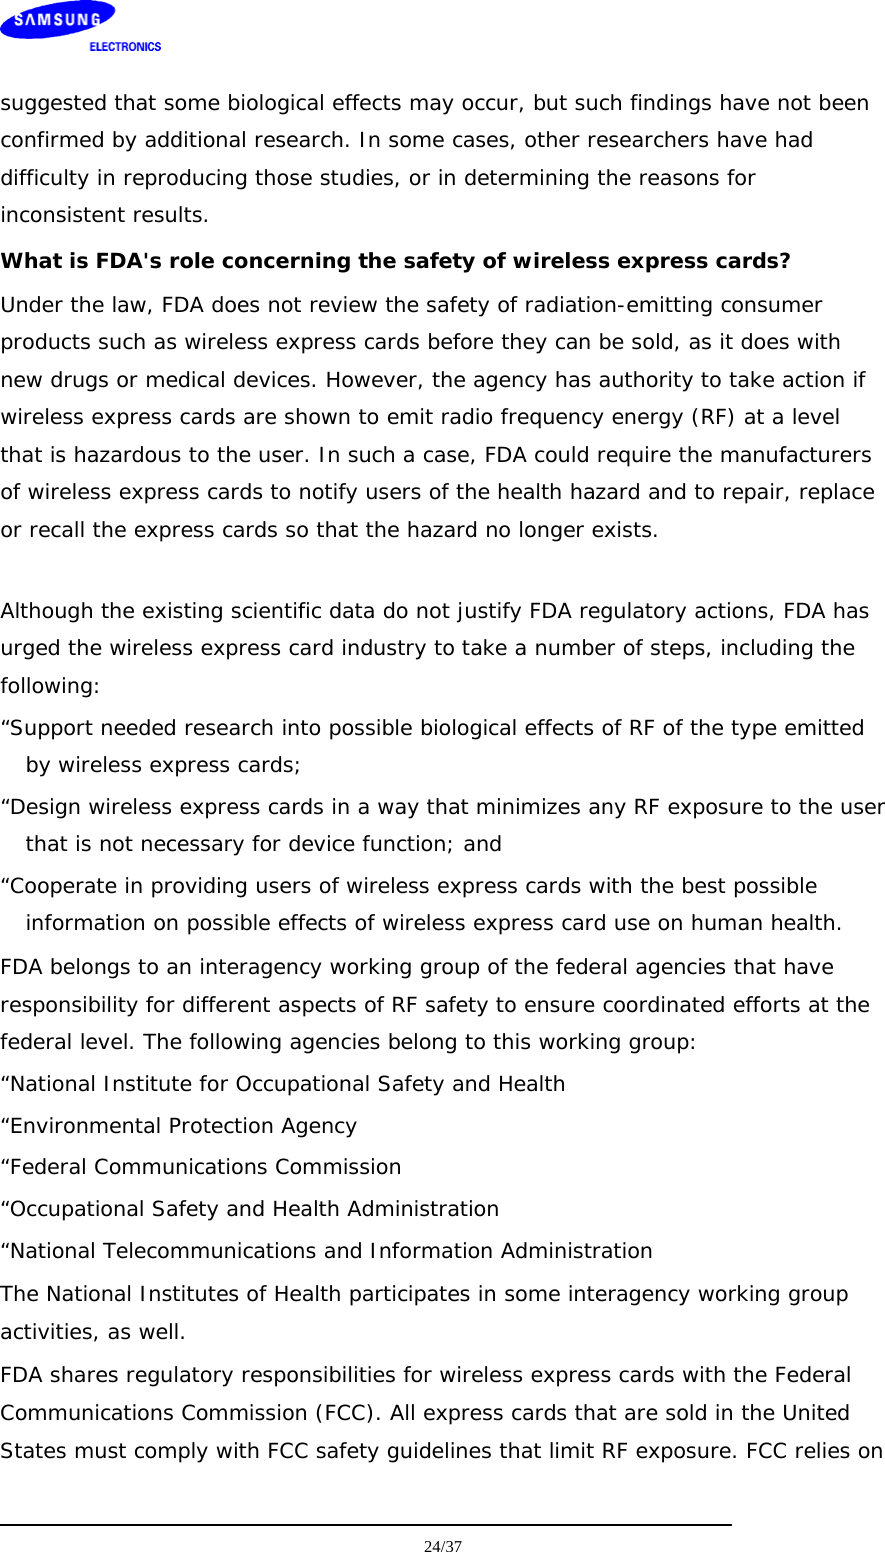    suggested that some biological effects may occur, but such findings have not been confirmed by additional research. In some cases, other researchers have had difficulty in reproducing those studies, or in determining the reasons for inconsistent results. What is FDA&apos;s role concerning the safety of wireless express cards? Under the law, FDA does not review the safety of radiation-emitting consumer products such as wireless express cards before they can be sold, as it does with new drugs or medical devices. However, the agency has authority to take action if wireless express cards are shown to emit radio frequency energy (RF) at a level that is hazardous to the user. In such a case, FDA could require the manufacturers of wireless express cards to notify users of the health hazard and to repair, replace or recall the express cards so that the hazard no longer exists.  Although the existing scientific data do not justify FDA regulatory actions, FDA has urged the wireless express card industry to take a number of steps, including the following: “Support needed research into possible biological effects of RF of the type emitted by wireless express cards; “Design wireless express cards in a way that minimizes any RF exposure to the user that is not necessary for device function; and “Cooperate in providing users of wireless express cards with the best possible information on possible effects of wireless express card use on human health. FDA belongs to an interagency working group of the federal agencies that have responsibility for different aspects of RF safety to ensure coordinated efforts at the federal level. The following agencies belong to this working group: “National Institute for Occupational Safety and Health “Environmental Protection Agency “Federal Communications Commission “Occupational Safety and Health Administration “National Telecommunications and Information Administration The National Institutes of Health participates in some interagency working group activities, as well. FDA shares regulatory responsibilities for wireless express cards with the Federal Communications Commission (FCC). All express cards that are sold in the United States must comply with FCC safety guidelines that limit RF exposure. FCC relies on  24/37  